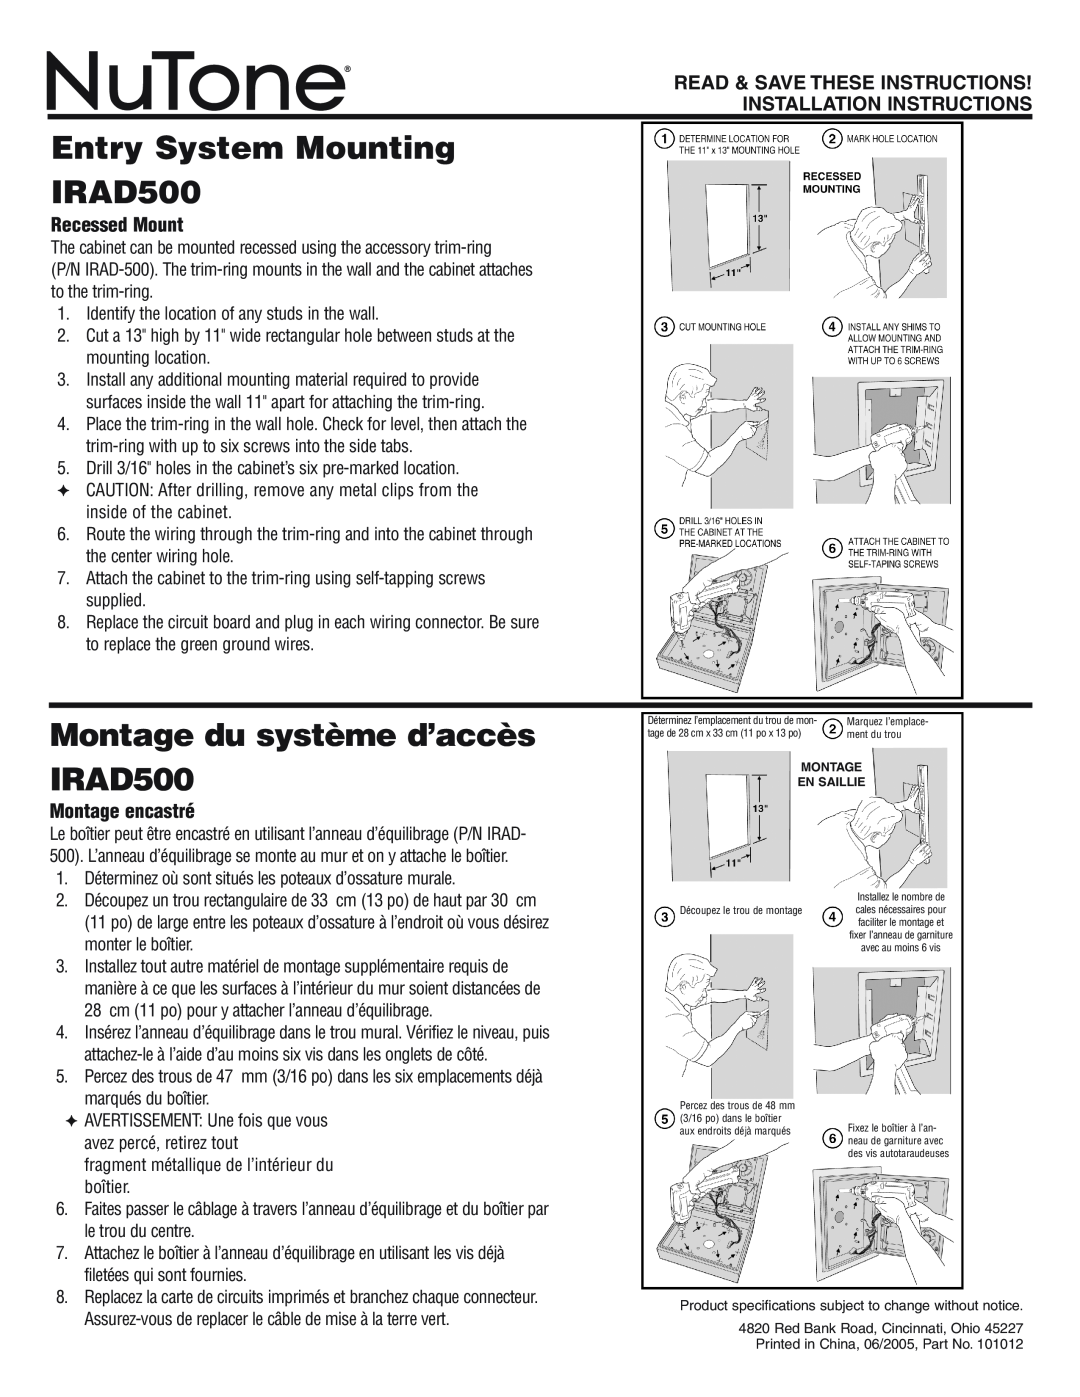 NuTone installation instructions Entry System Mounting IRAD500, Montage du système d’accès IRAD500, Recessed Mount 